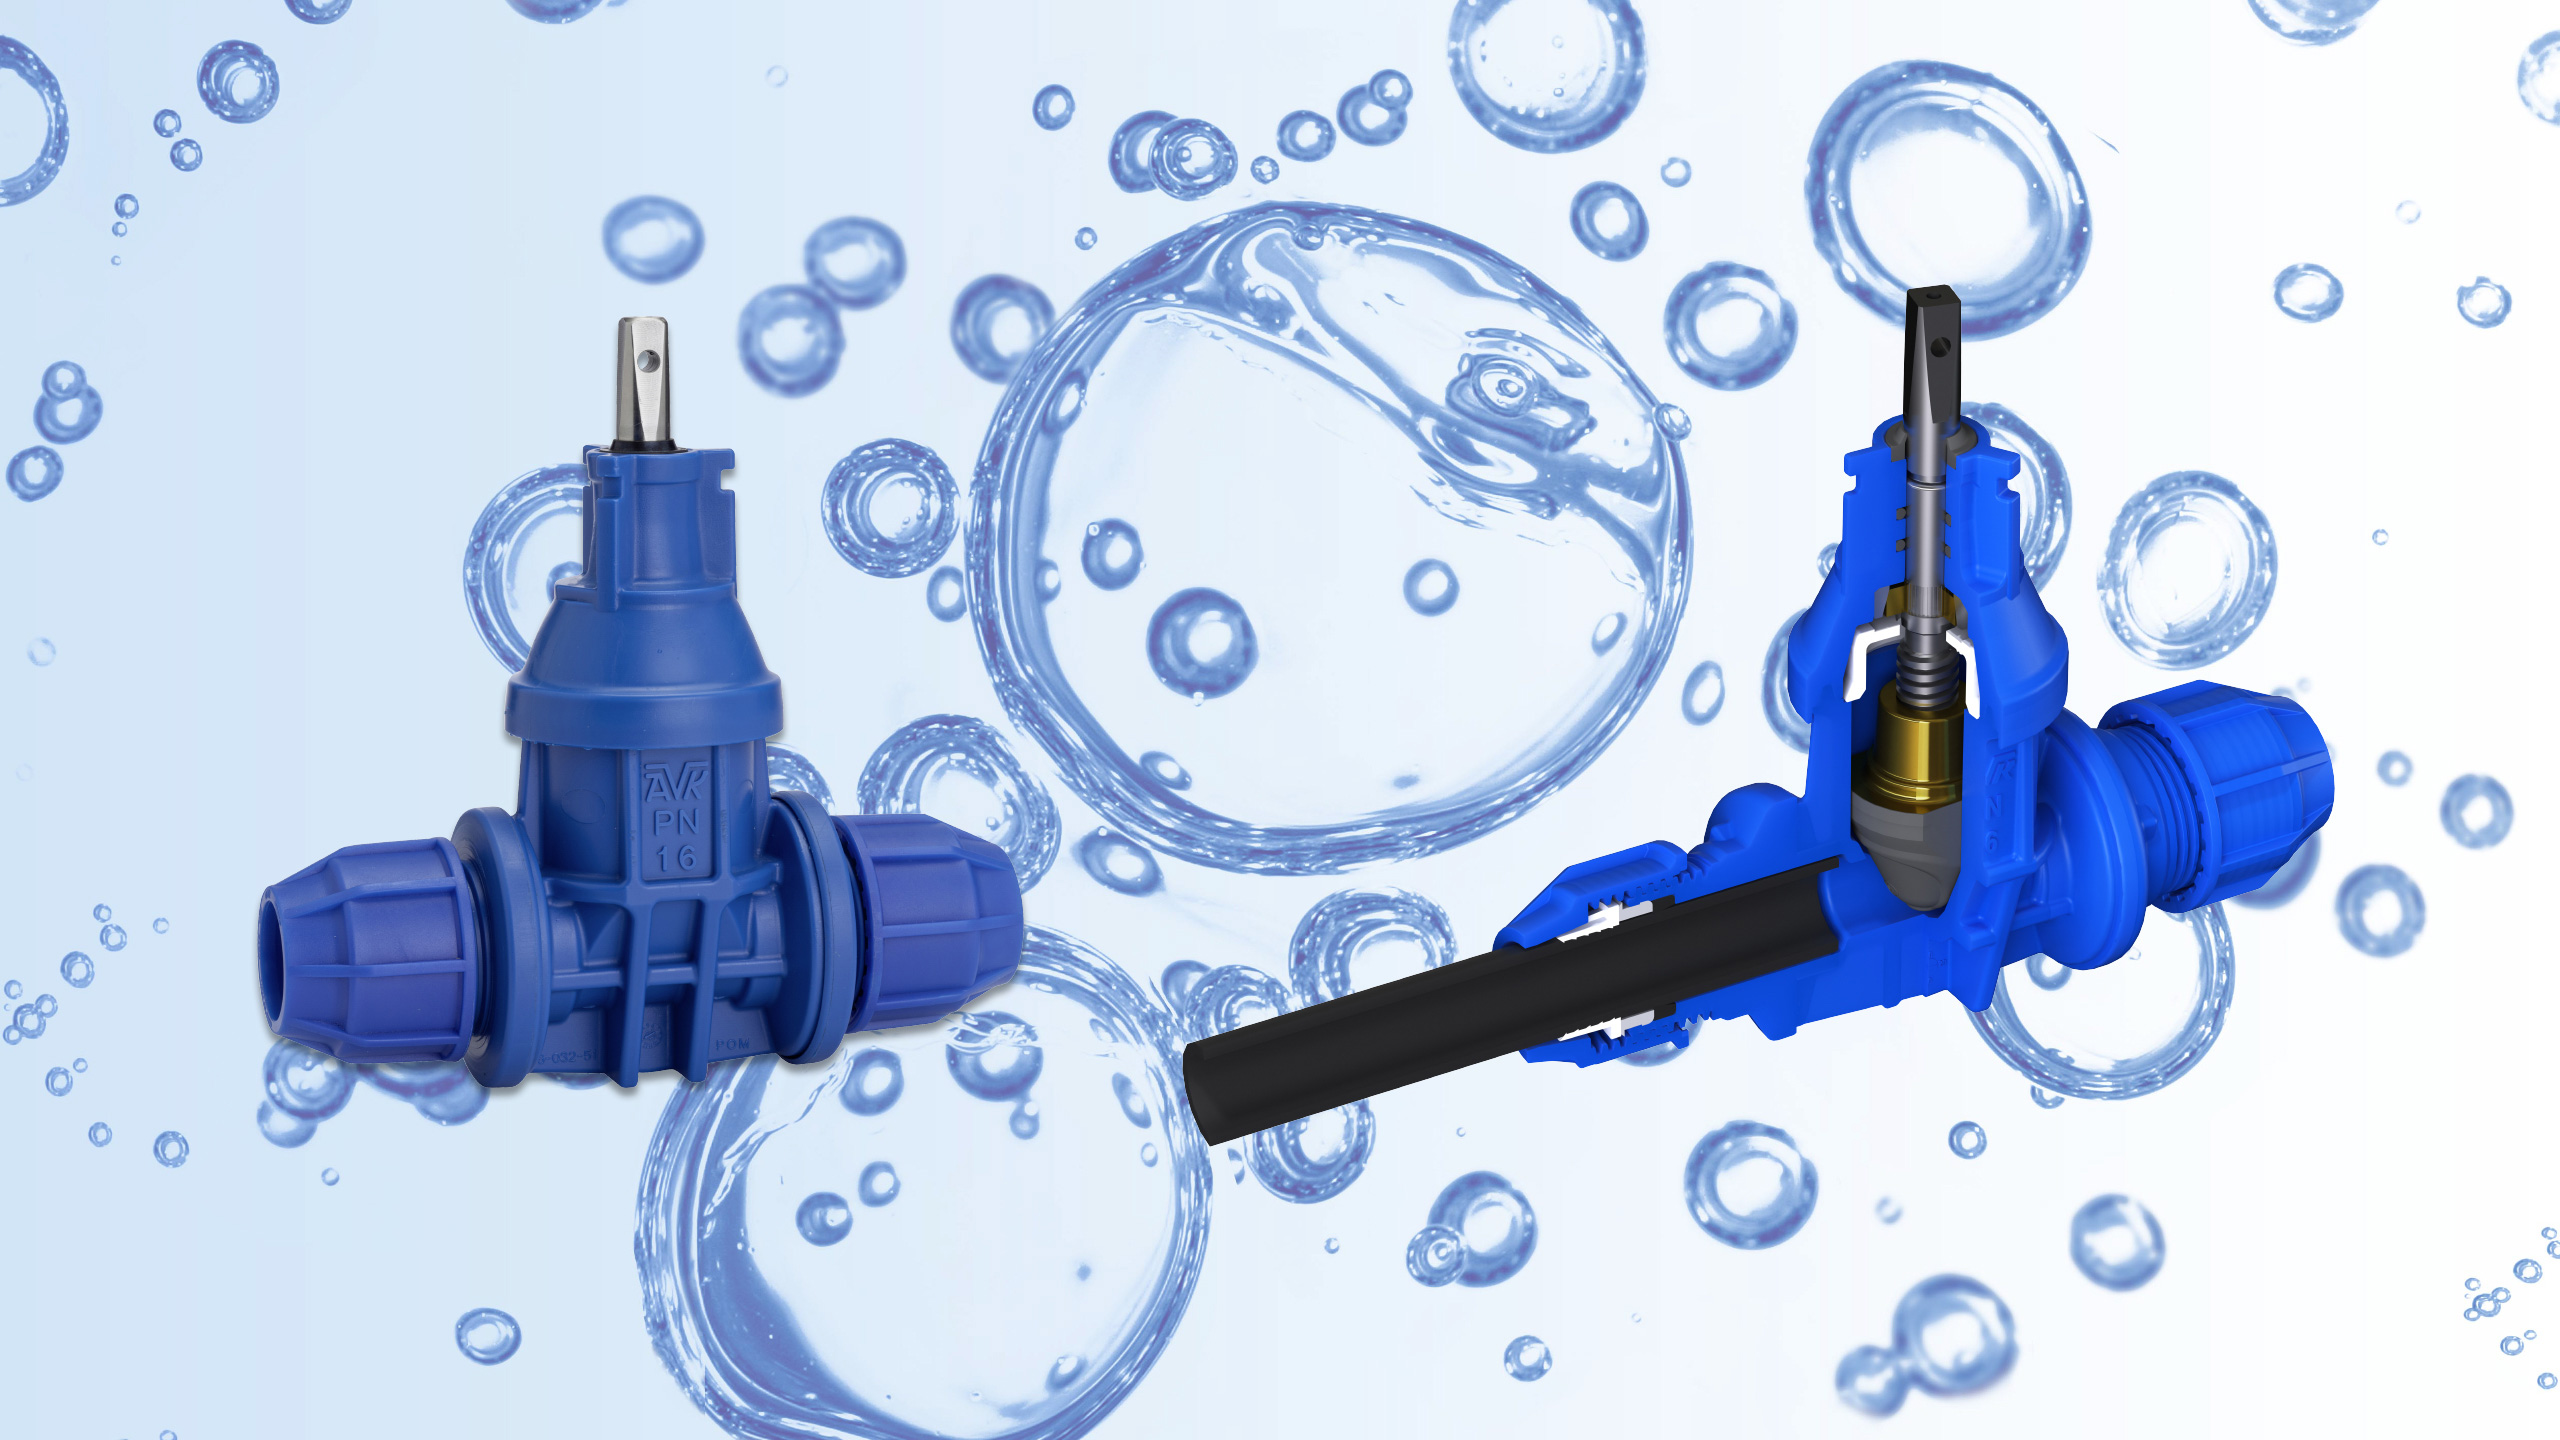 Introducing POM service connection valves with Pentomech couplings